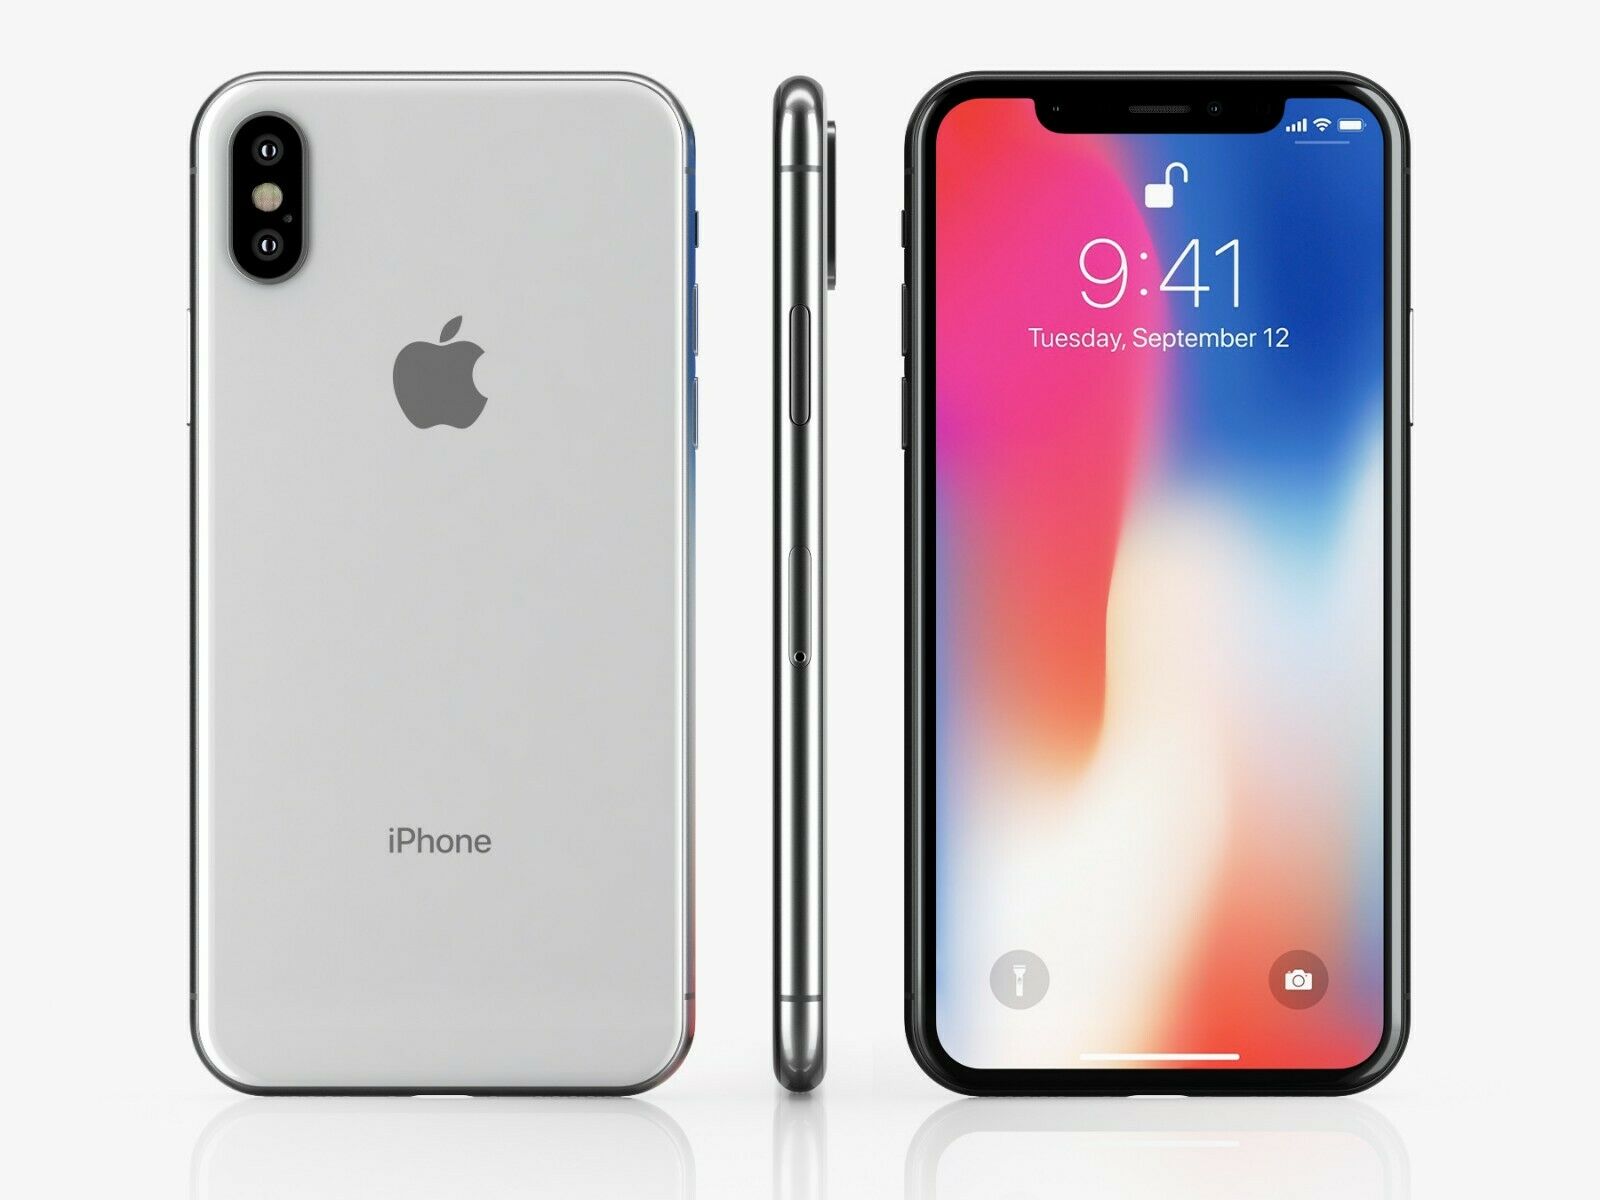 APPLE IPHONE X A1901 64GB UNLOCKED SMARTPHONE-BLK  Refurbished with Charger - Atlas Computers & Electronics 